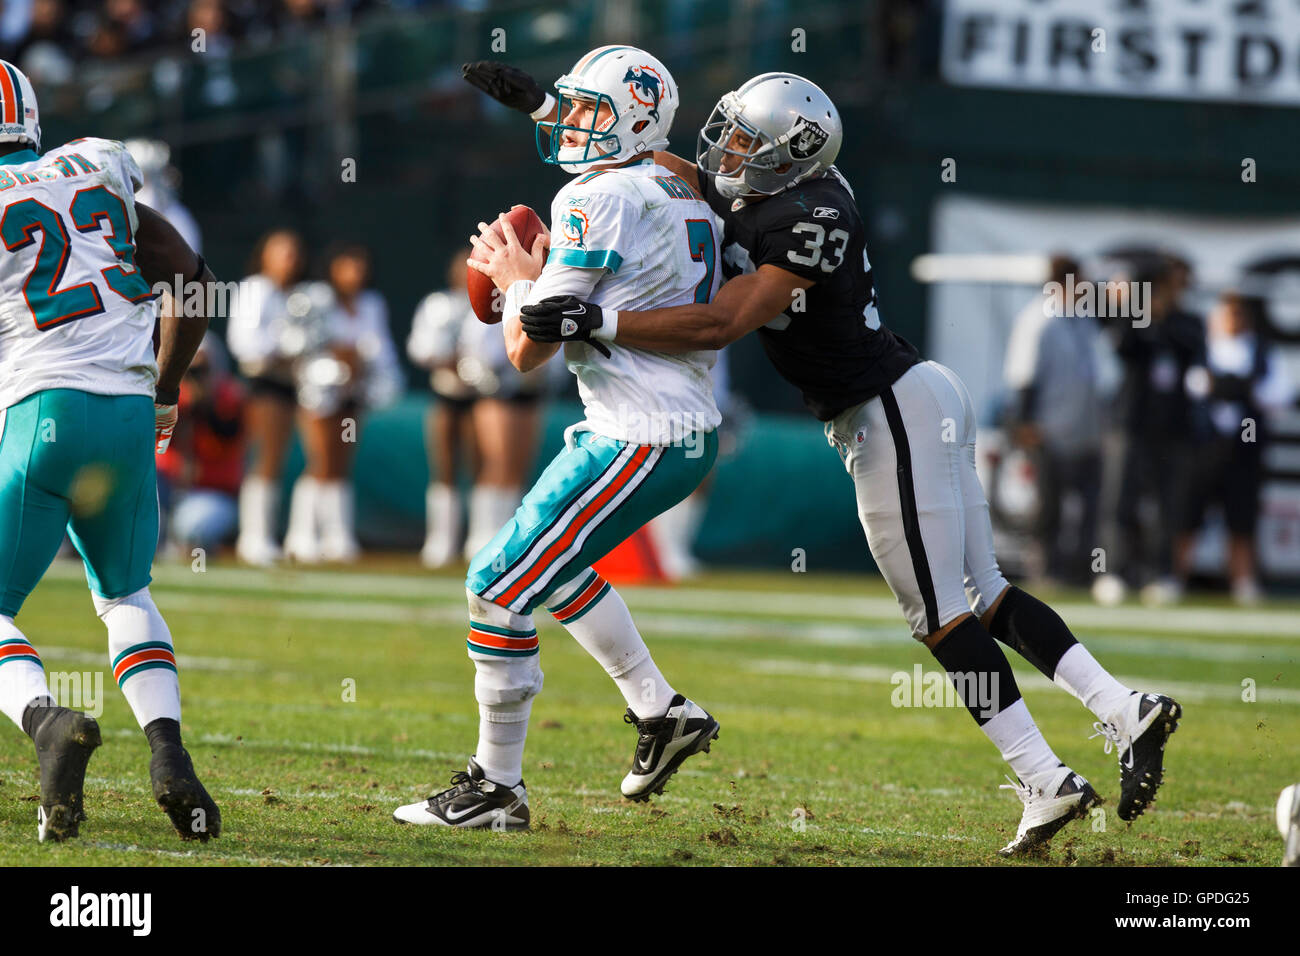 November 28, 2010; Oakland, CA, USA;  Miami Dolphins quarterback Chad Henne (7) is sacked by Oakland Raiders safety Tyvon Branch (33) during the second quarter at Oakland-Alameda County Coliseum. Stock Photo